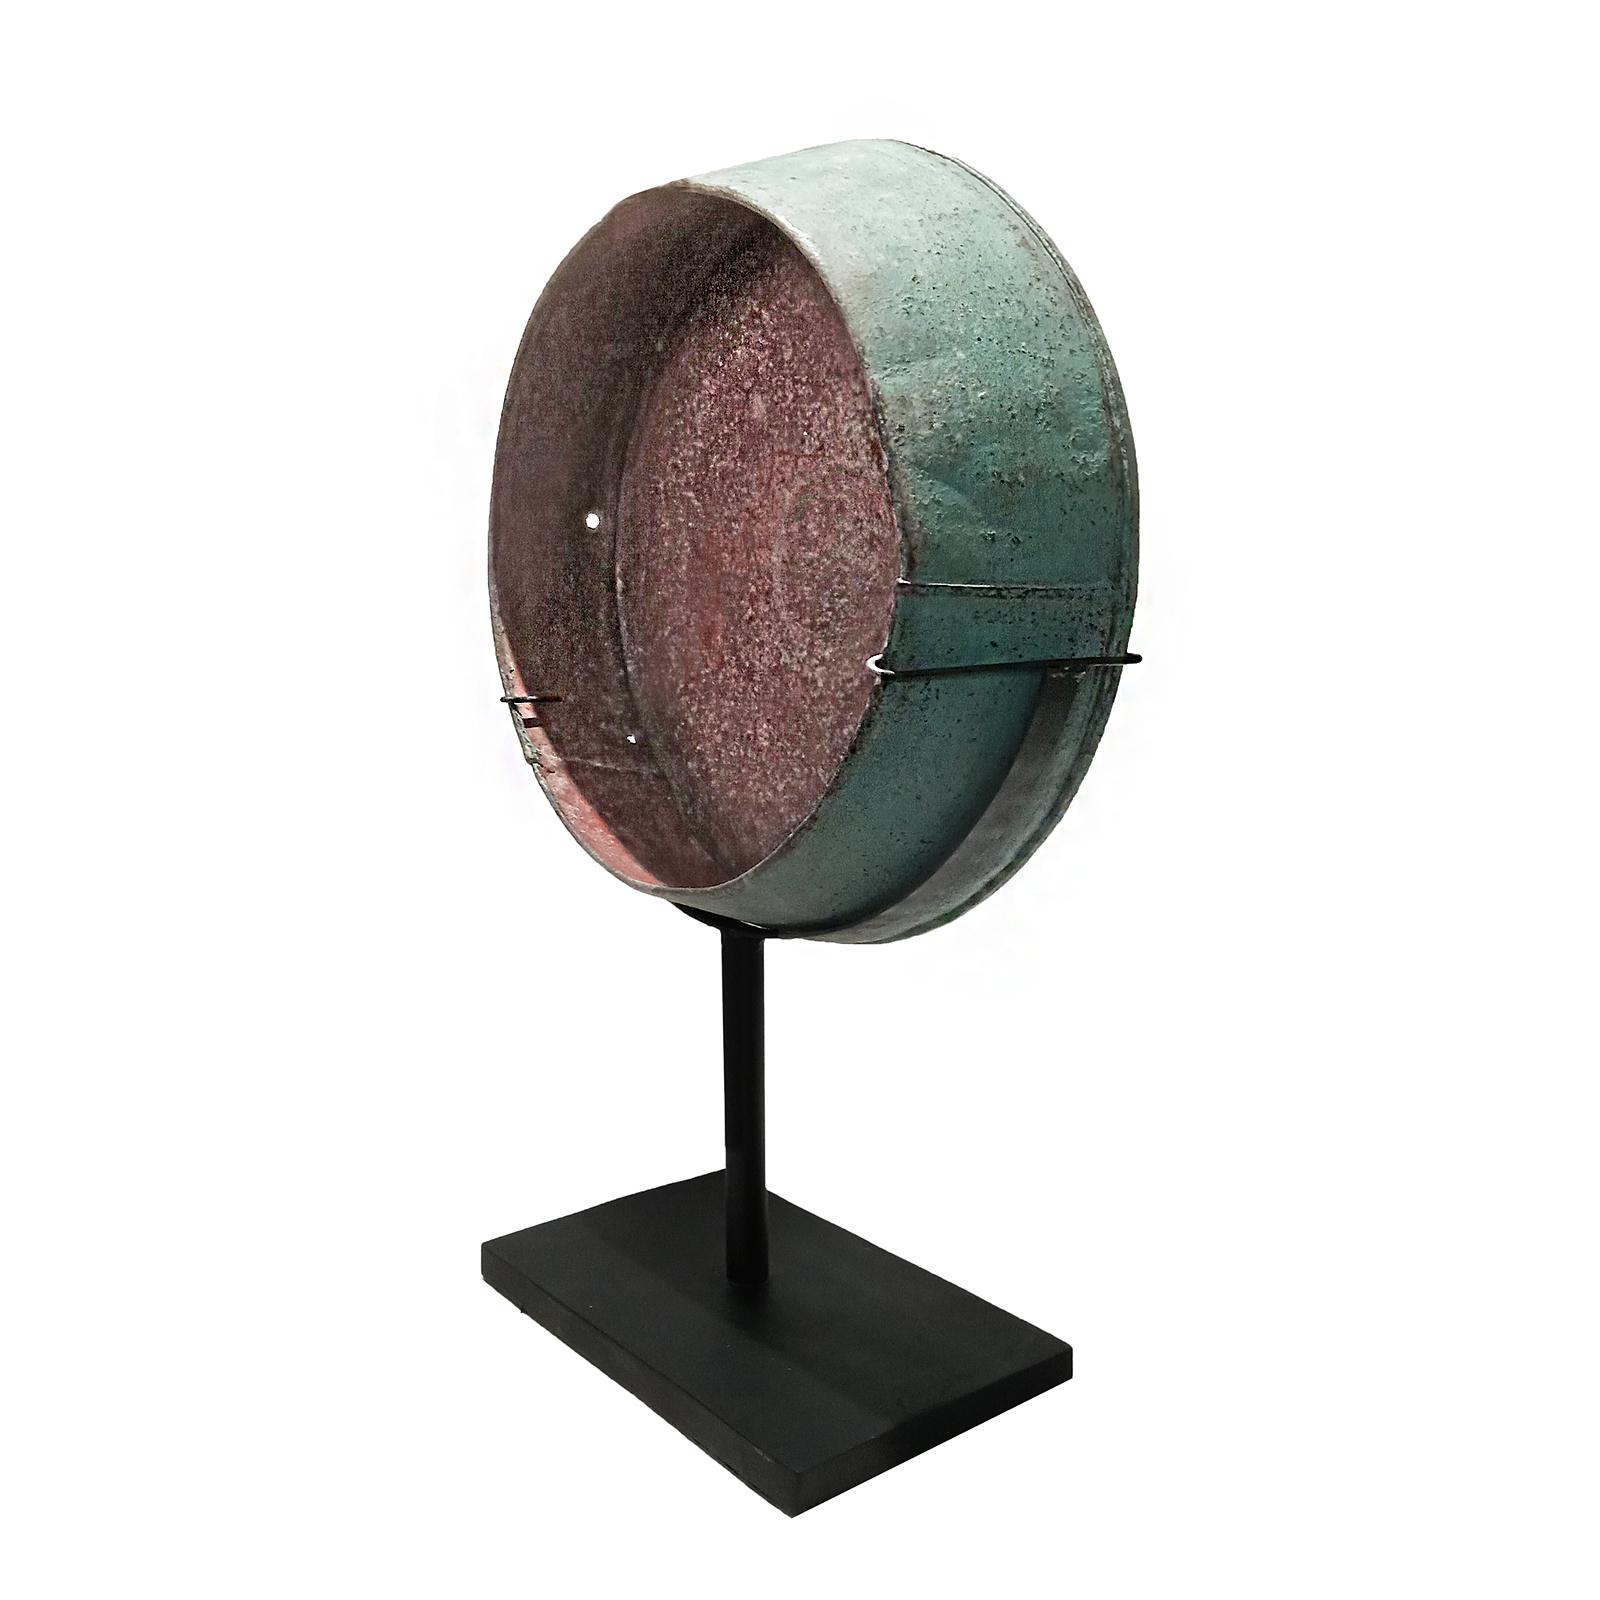 Painted Indonesian Gong on Stand, mid-20th Century For Sale 1